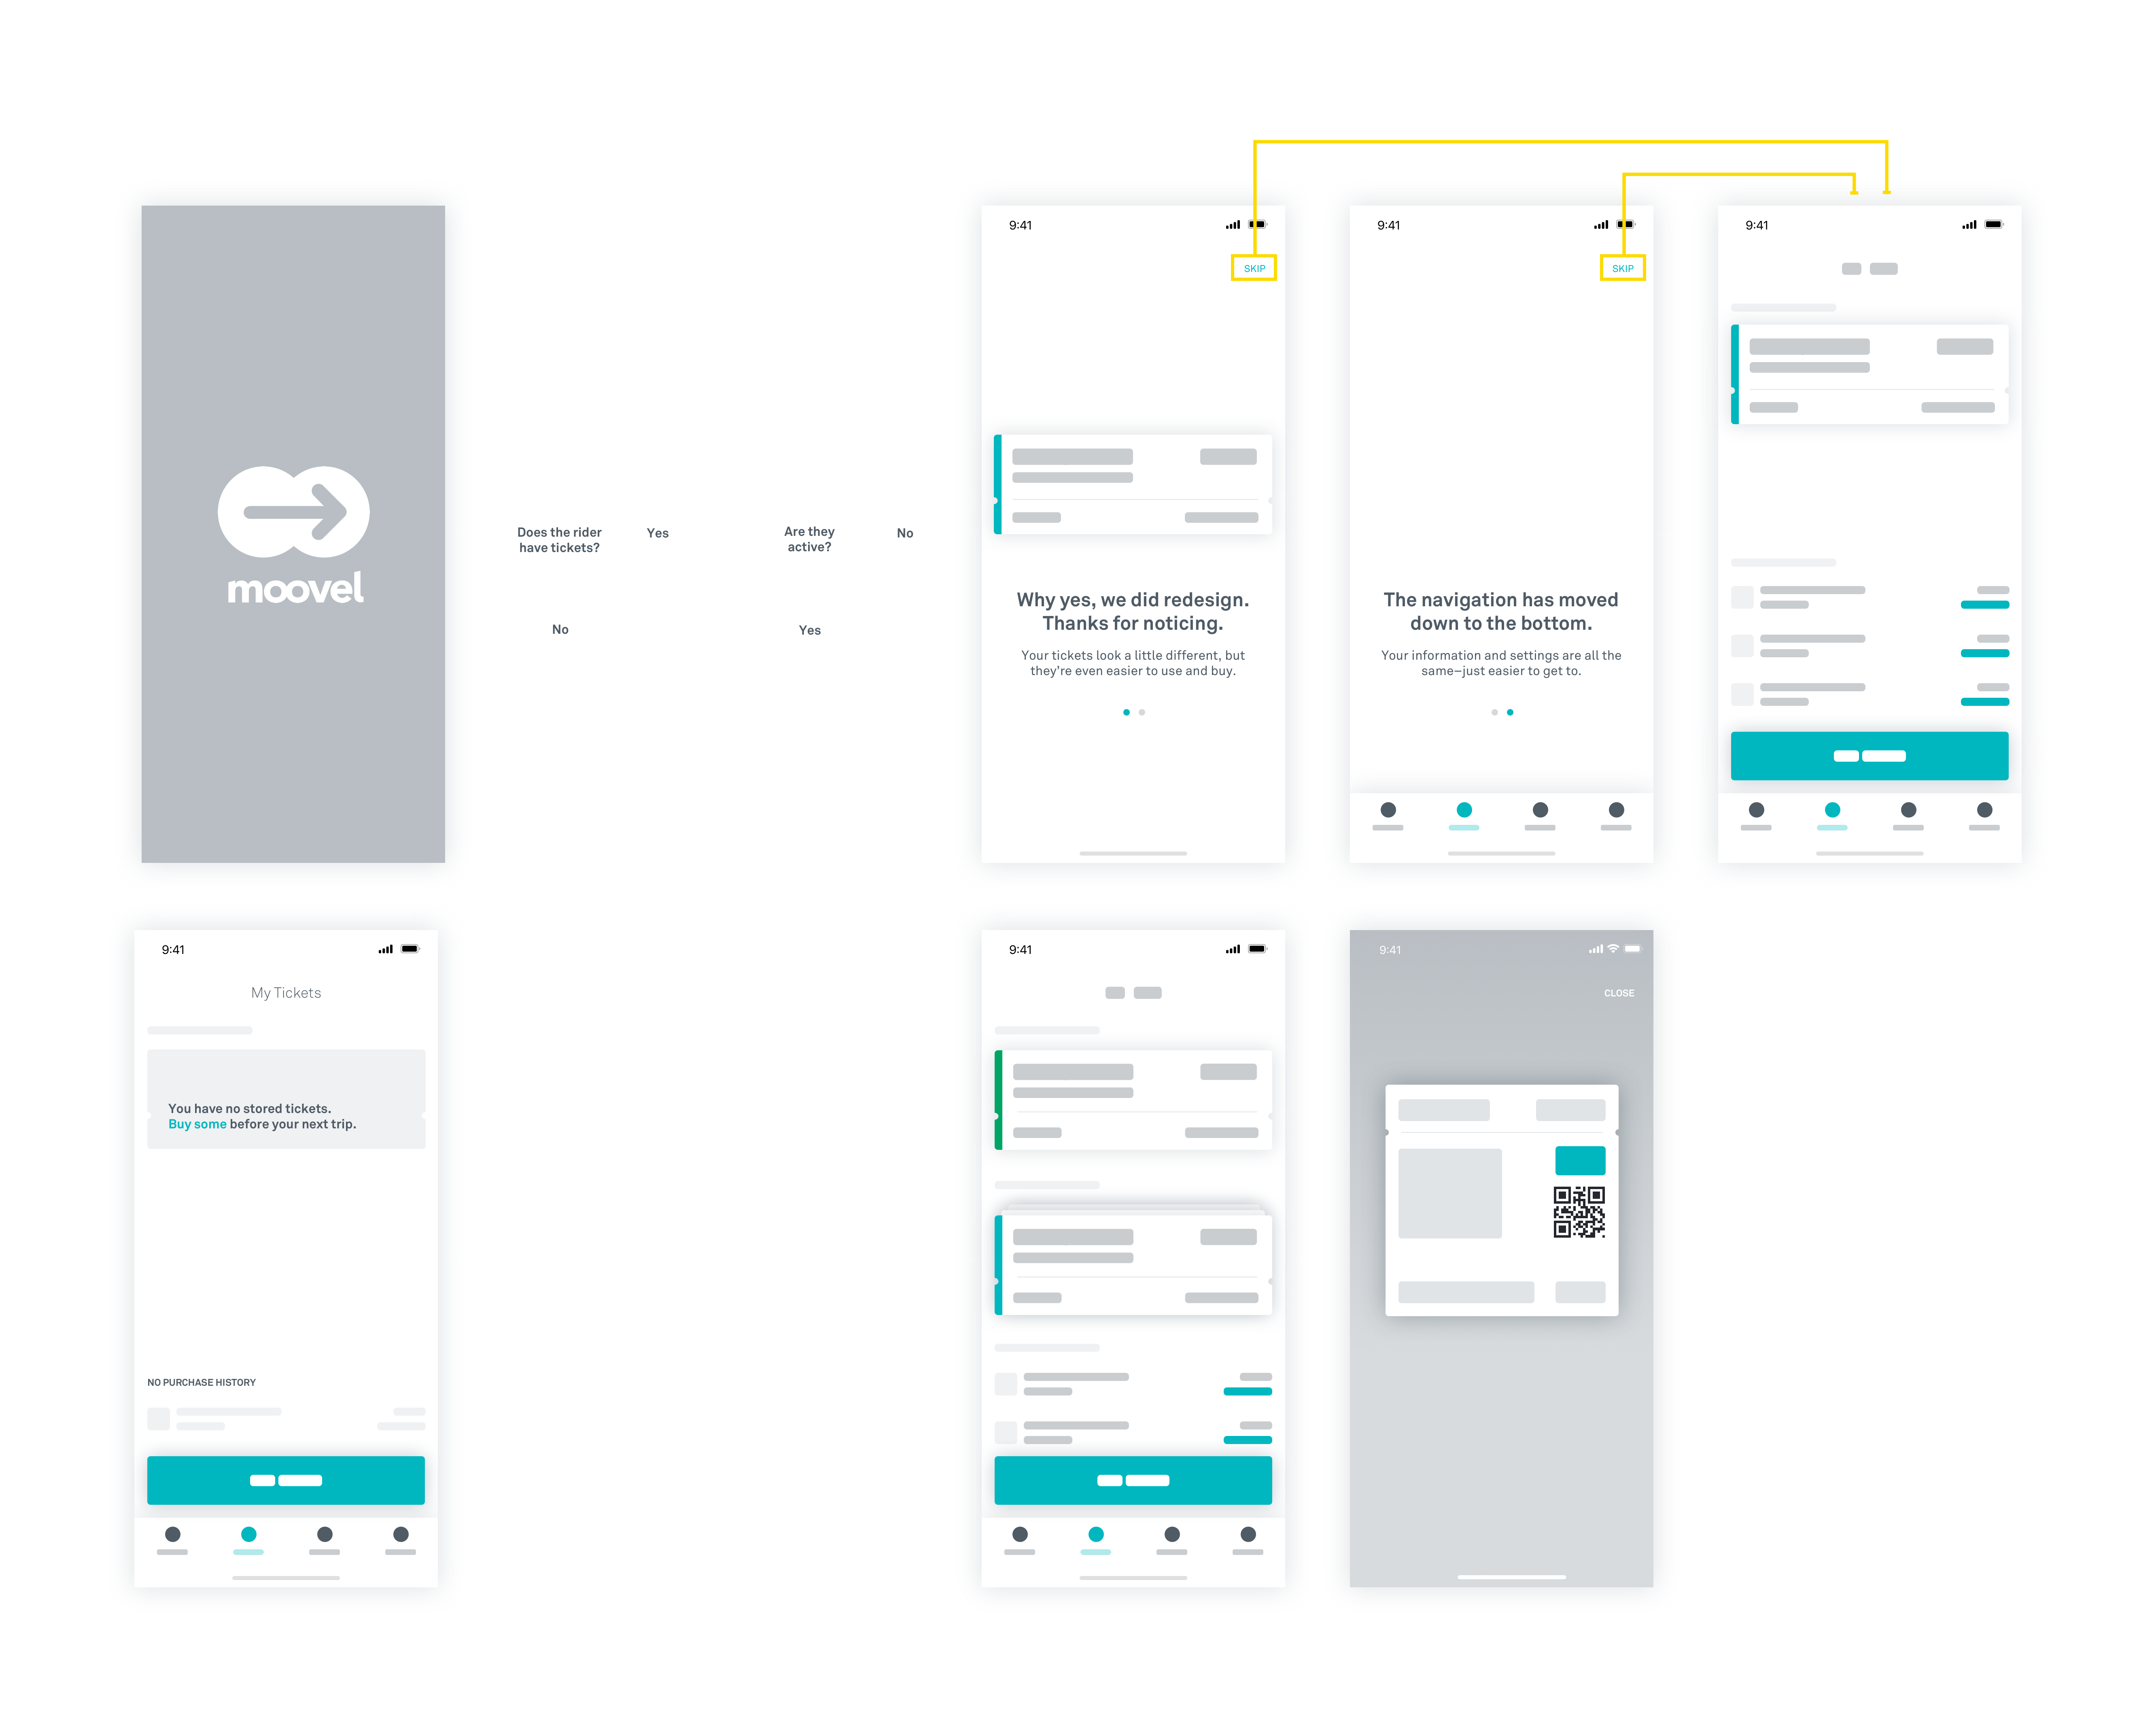 Wireframes for the moovel onboarding tour